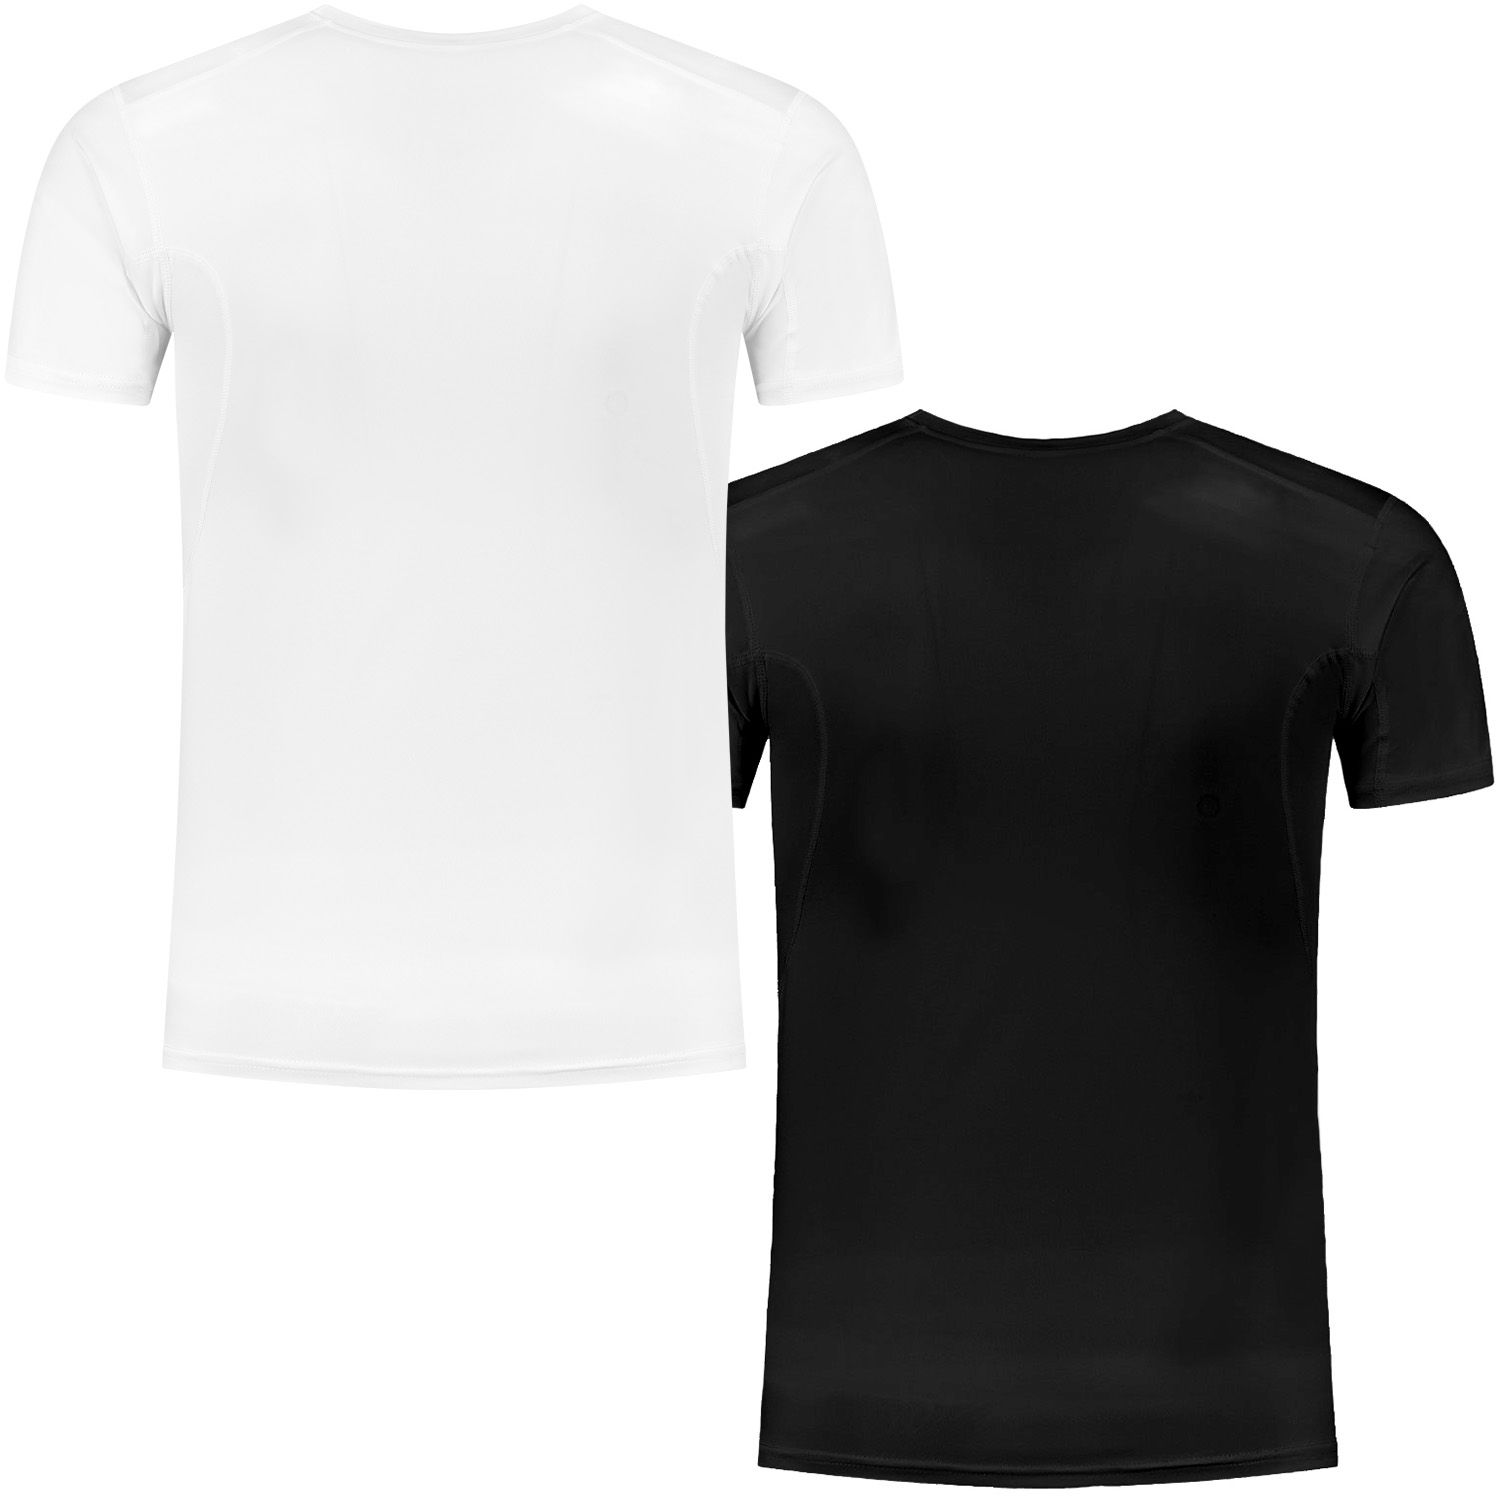 gladiator sports compression shirt for men in black and white back view